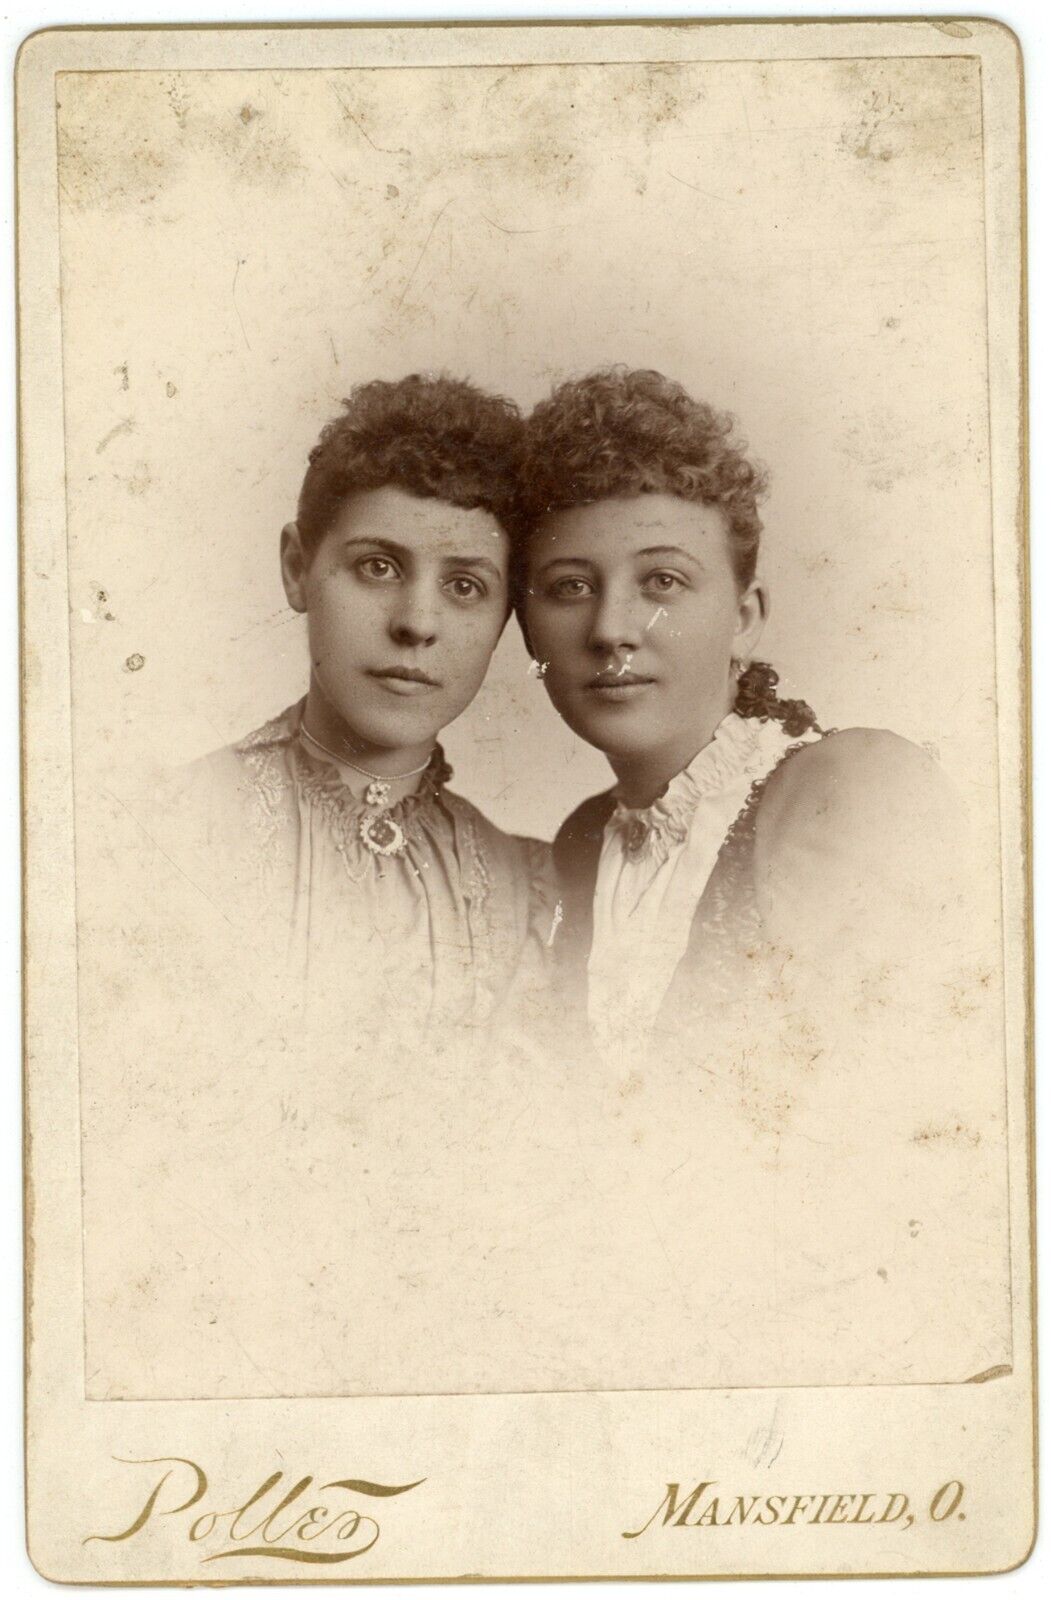 CIRCA 1890'S CABINET CARD Beautiful Affectionate Sisters Pollen Mansfield, OH